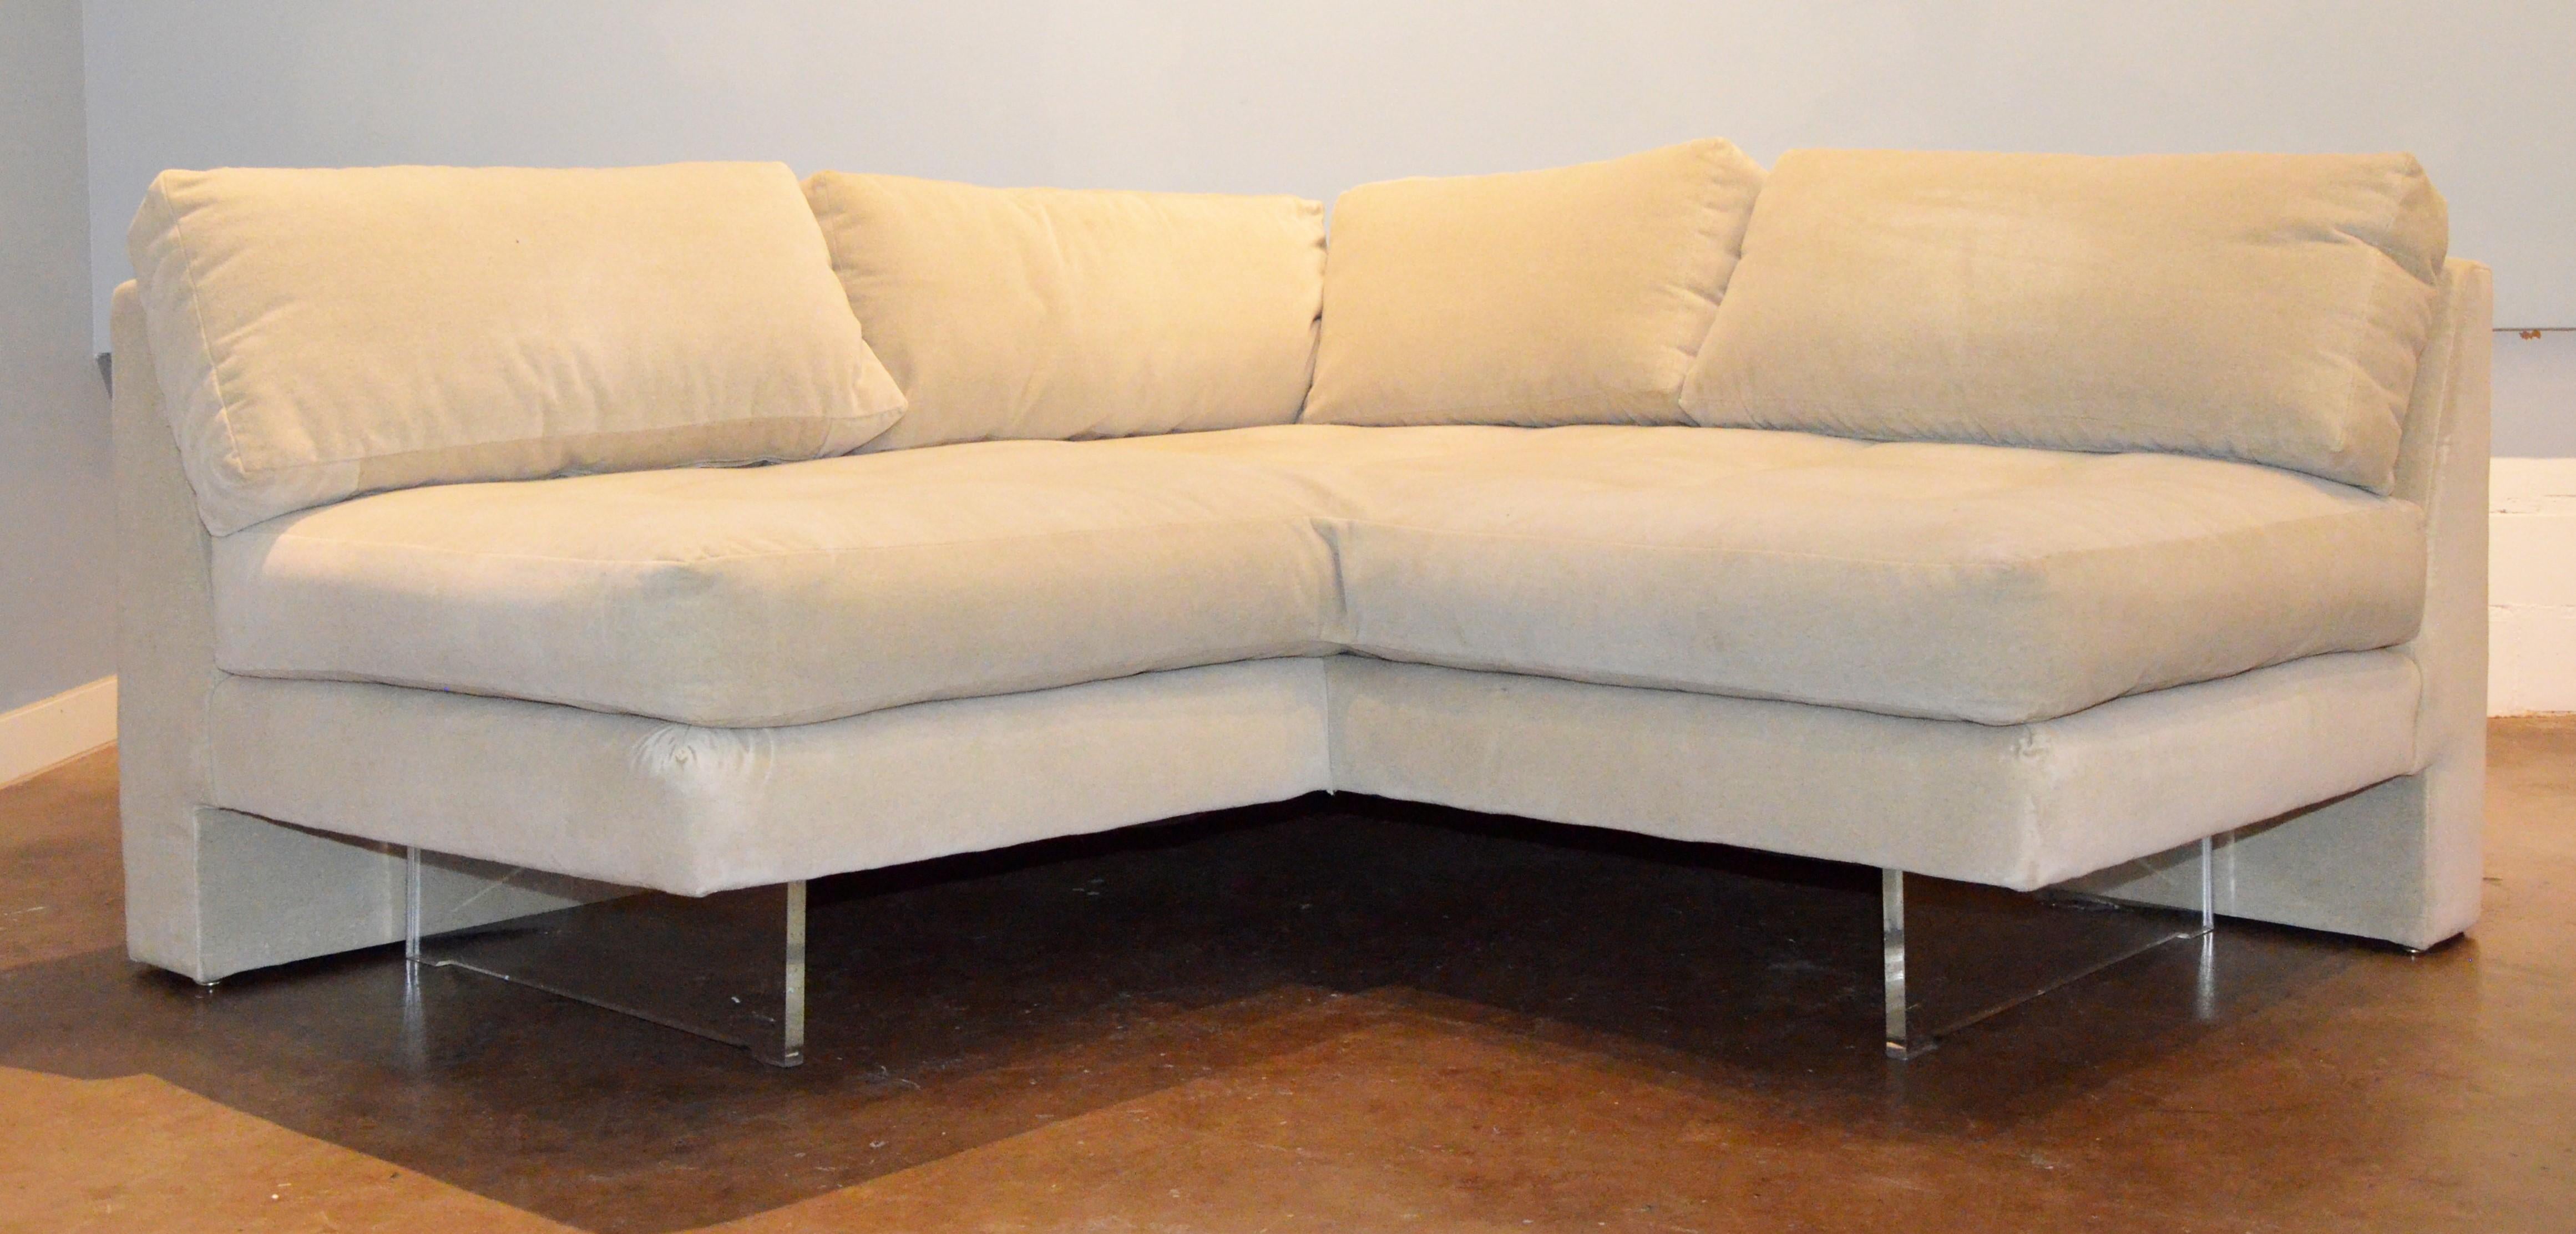 Kagan Ivory or Gray Flannel Button Tufted Three Section Omnibus Sectional Sofa In Good Condition For Sale In Houston, TX